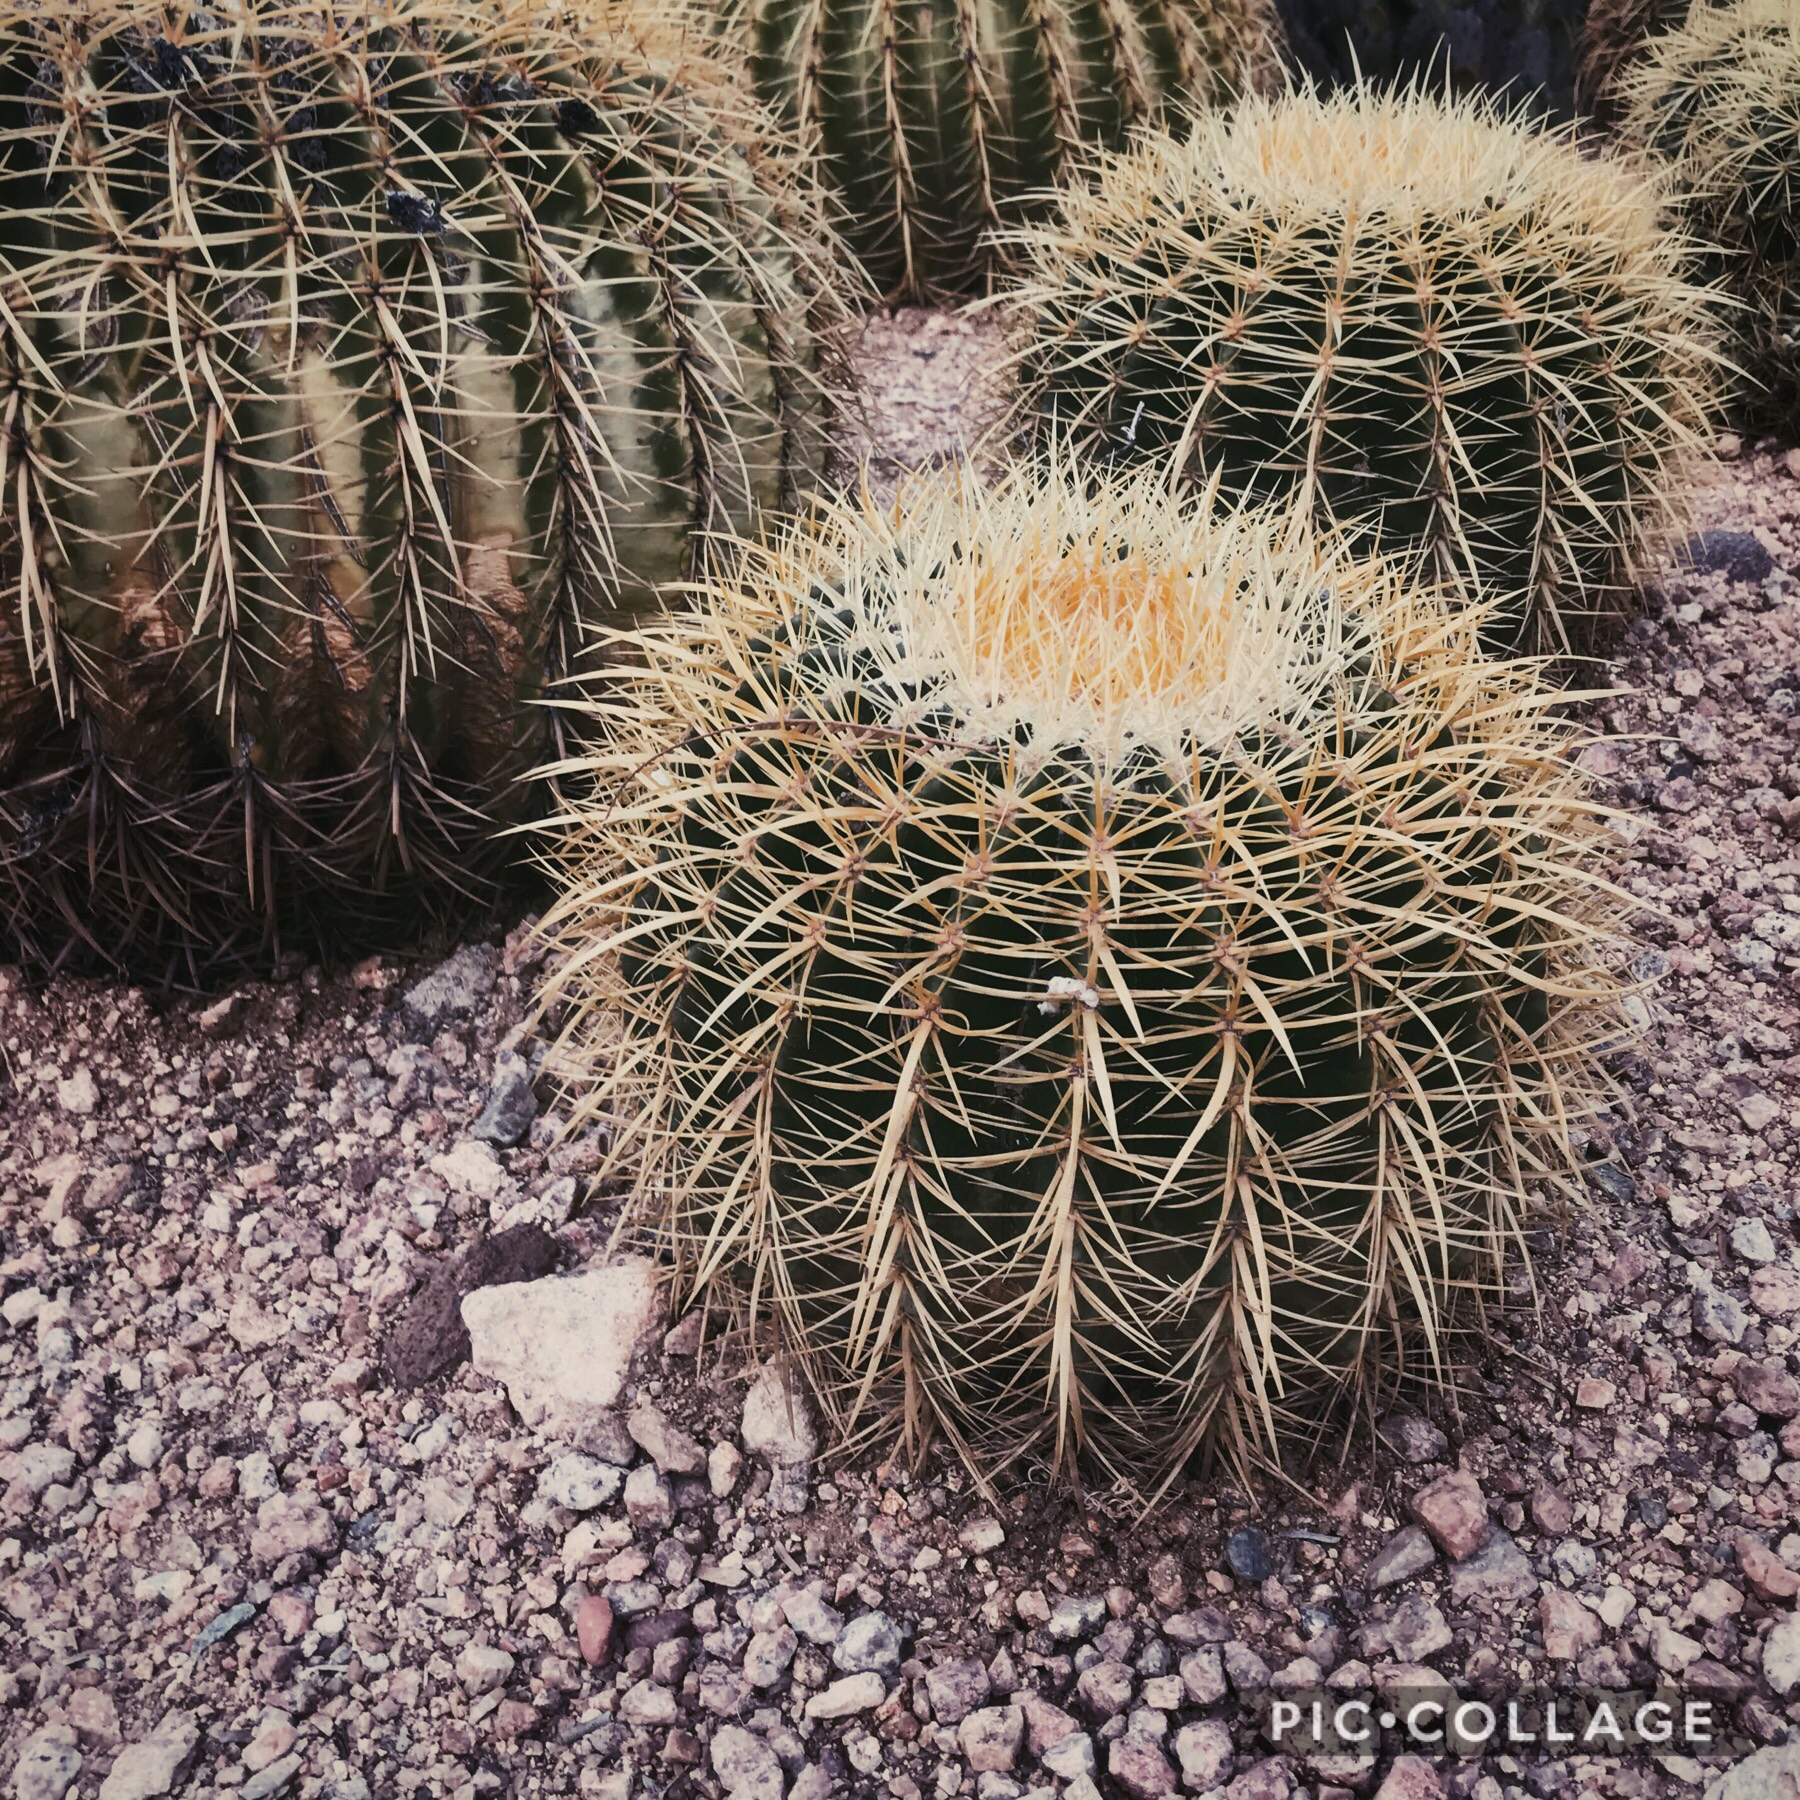 ∿hola chingus∿

we went to a cactus garnden... gUESS WHAT IT WAS FULL OF CACTI😱😱😱

cRazY rIght?!??
i know smh 

🤙🤙🤙


(i’m so sorry i’m like this)
😂